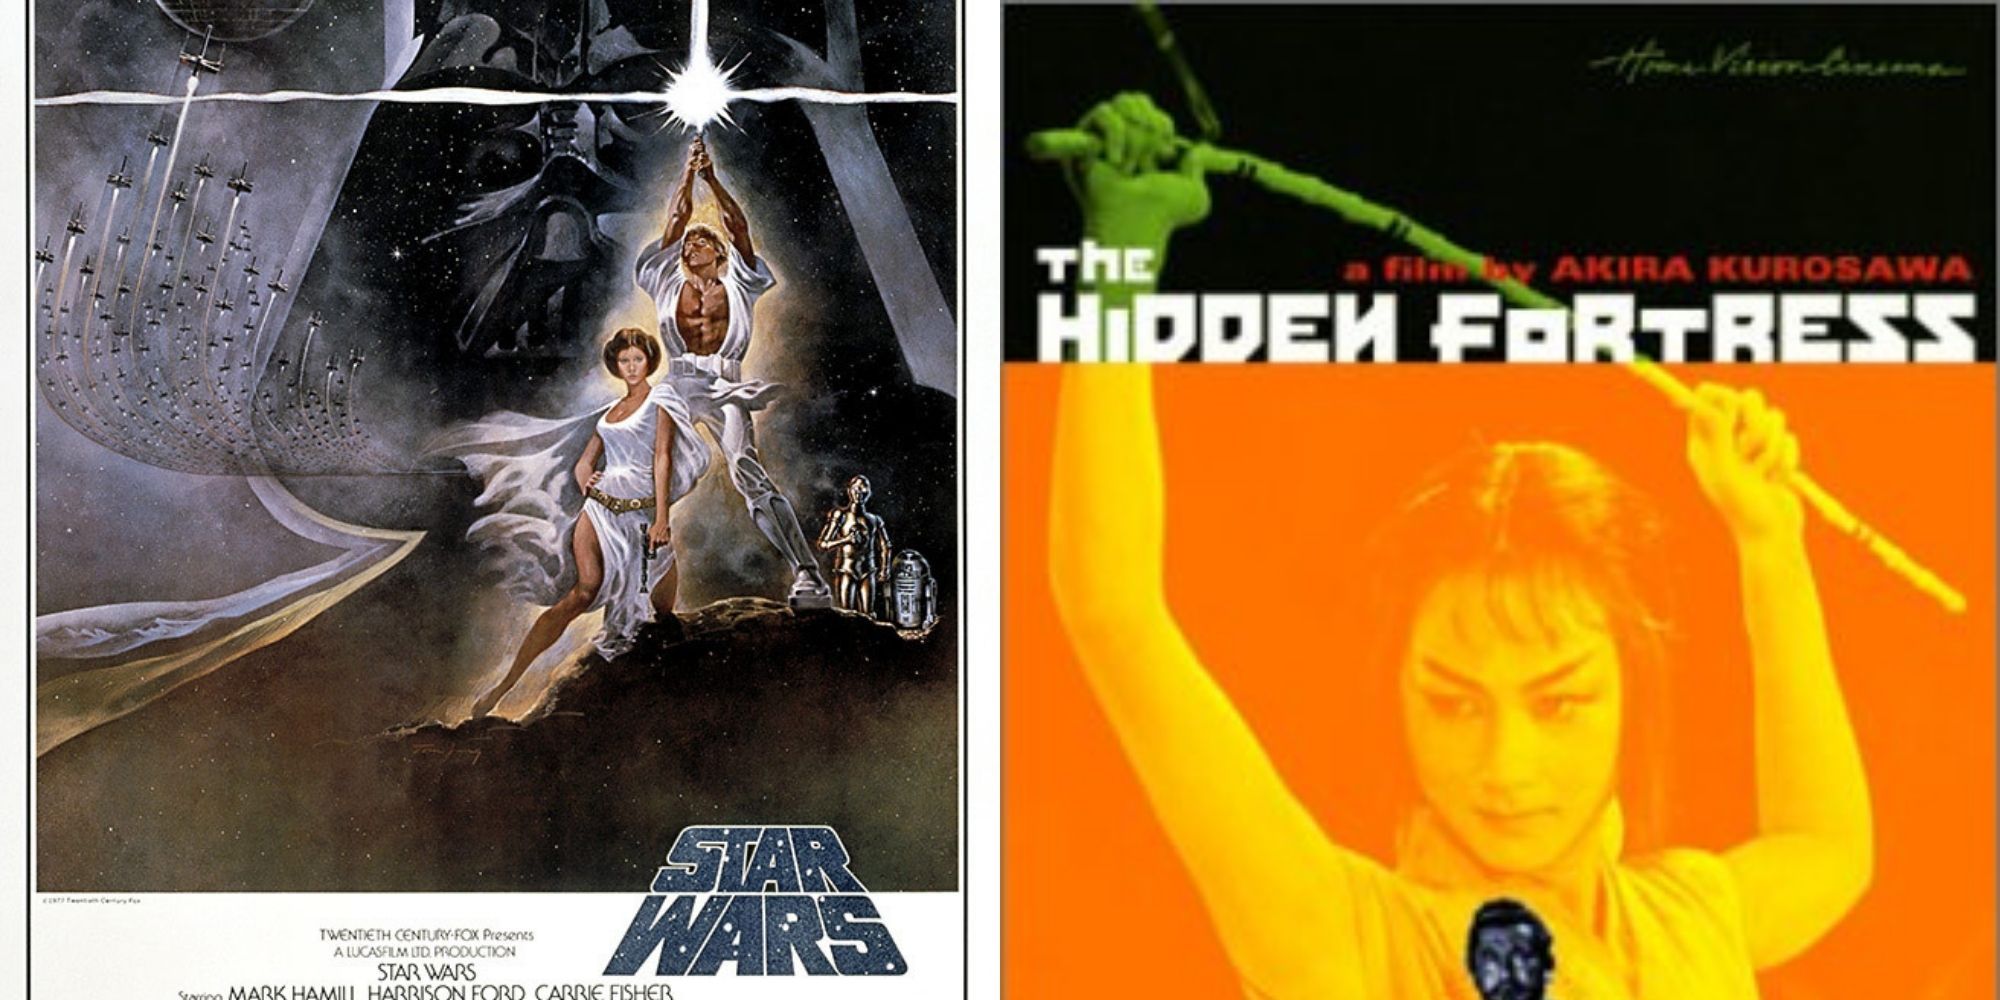 Star Wars poster on the left and The Hidden Fortress poster on the right